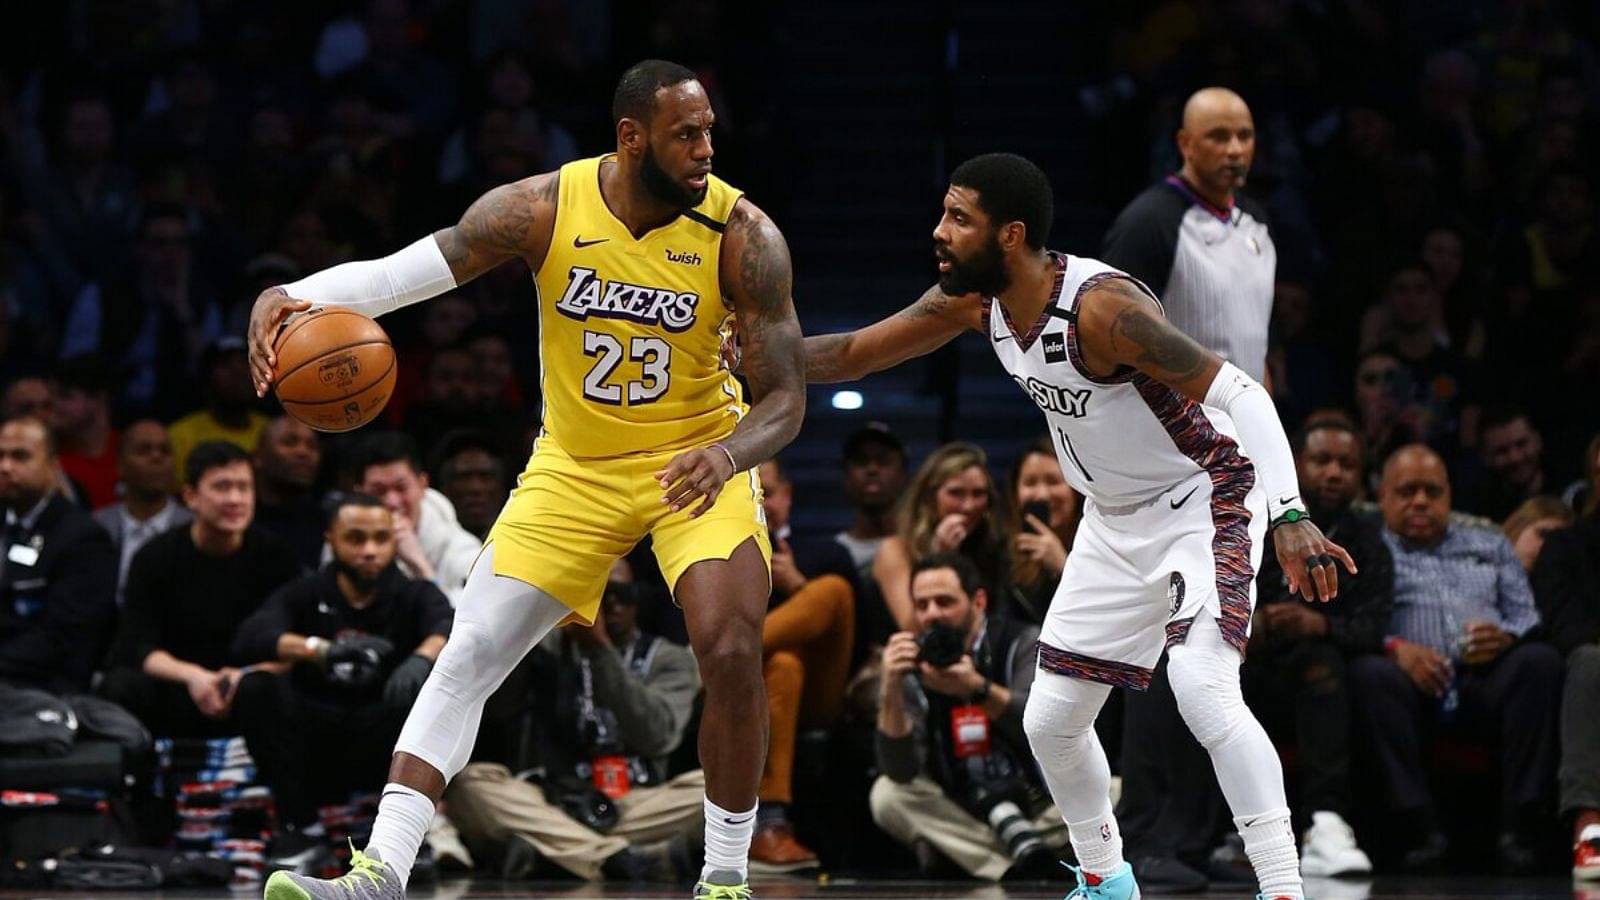 "Why didn't LeBron James and Kyrie Irving appear together?!": $17 million analyst puts forth conspiracies on recent 'The Shop'